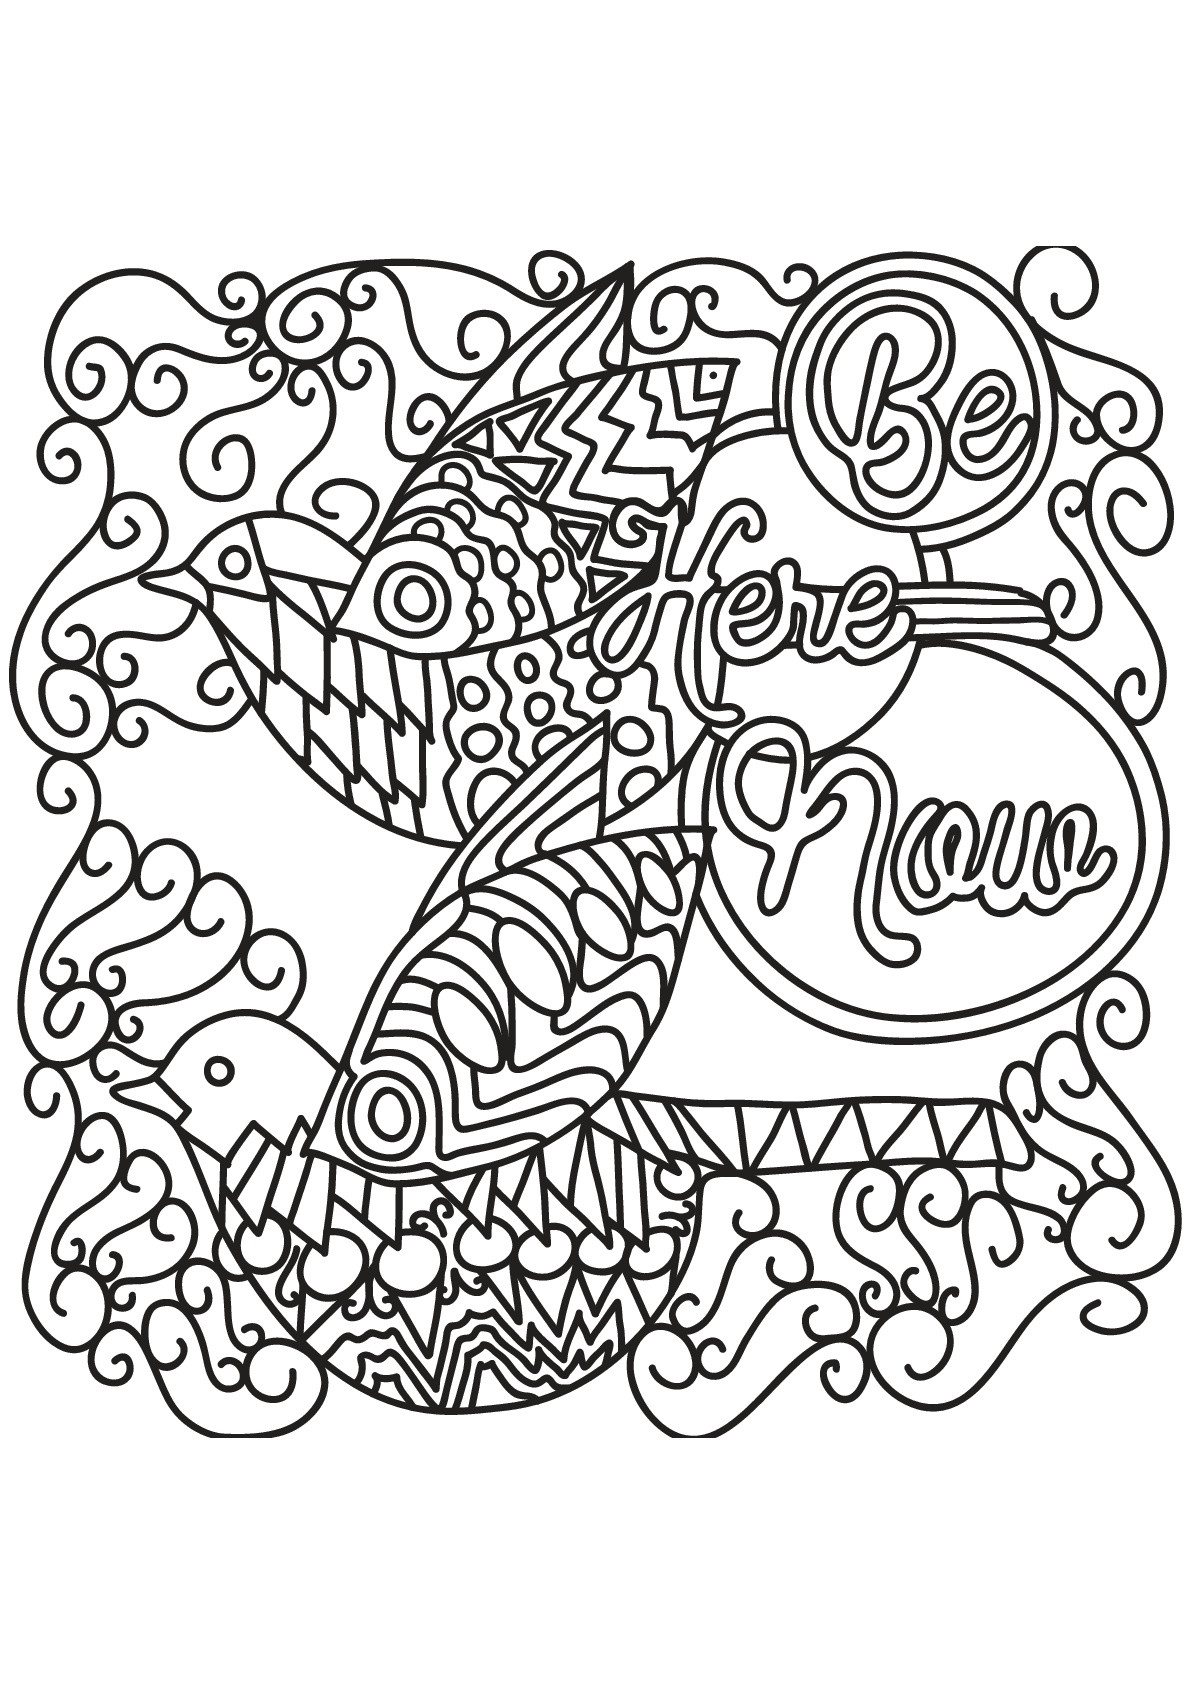 Quote Coloring Pages For Adults
 Free book quote 16 Quotes Adult Coloring Pages